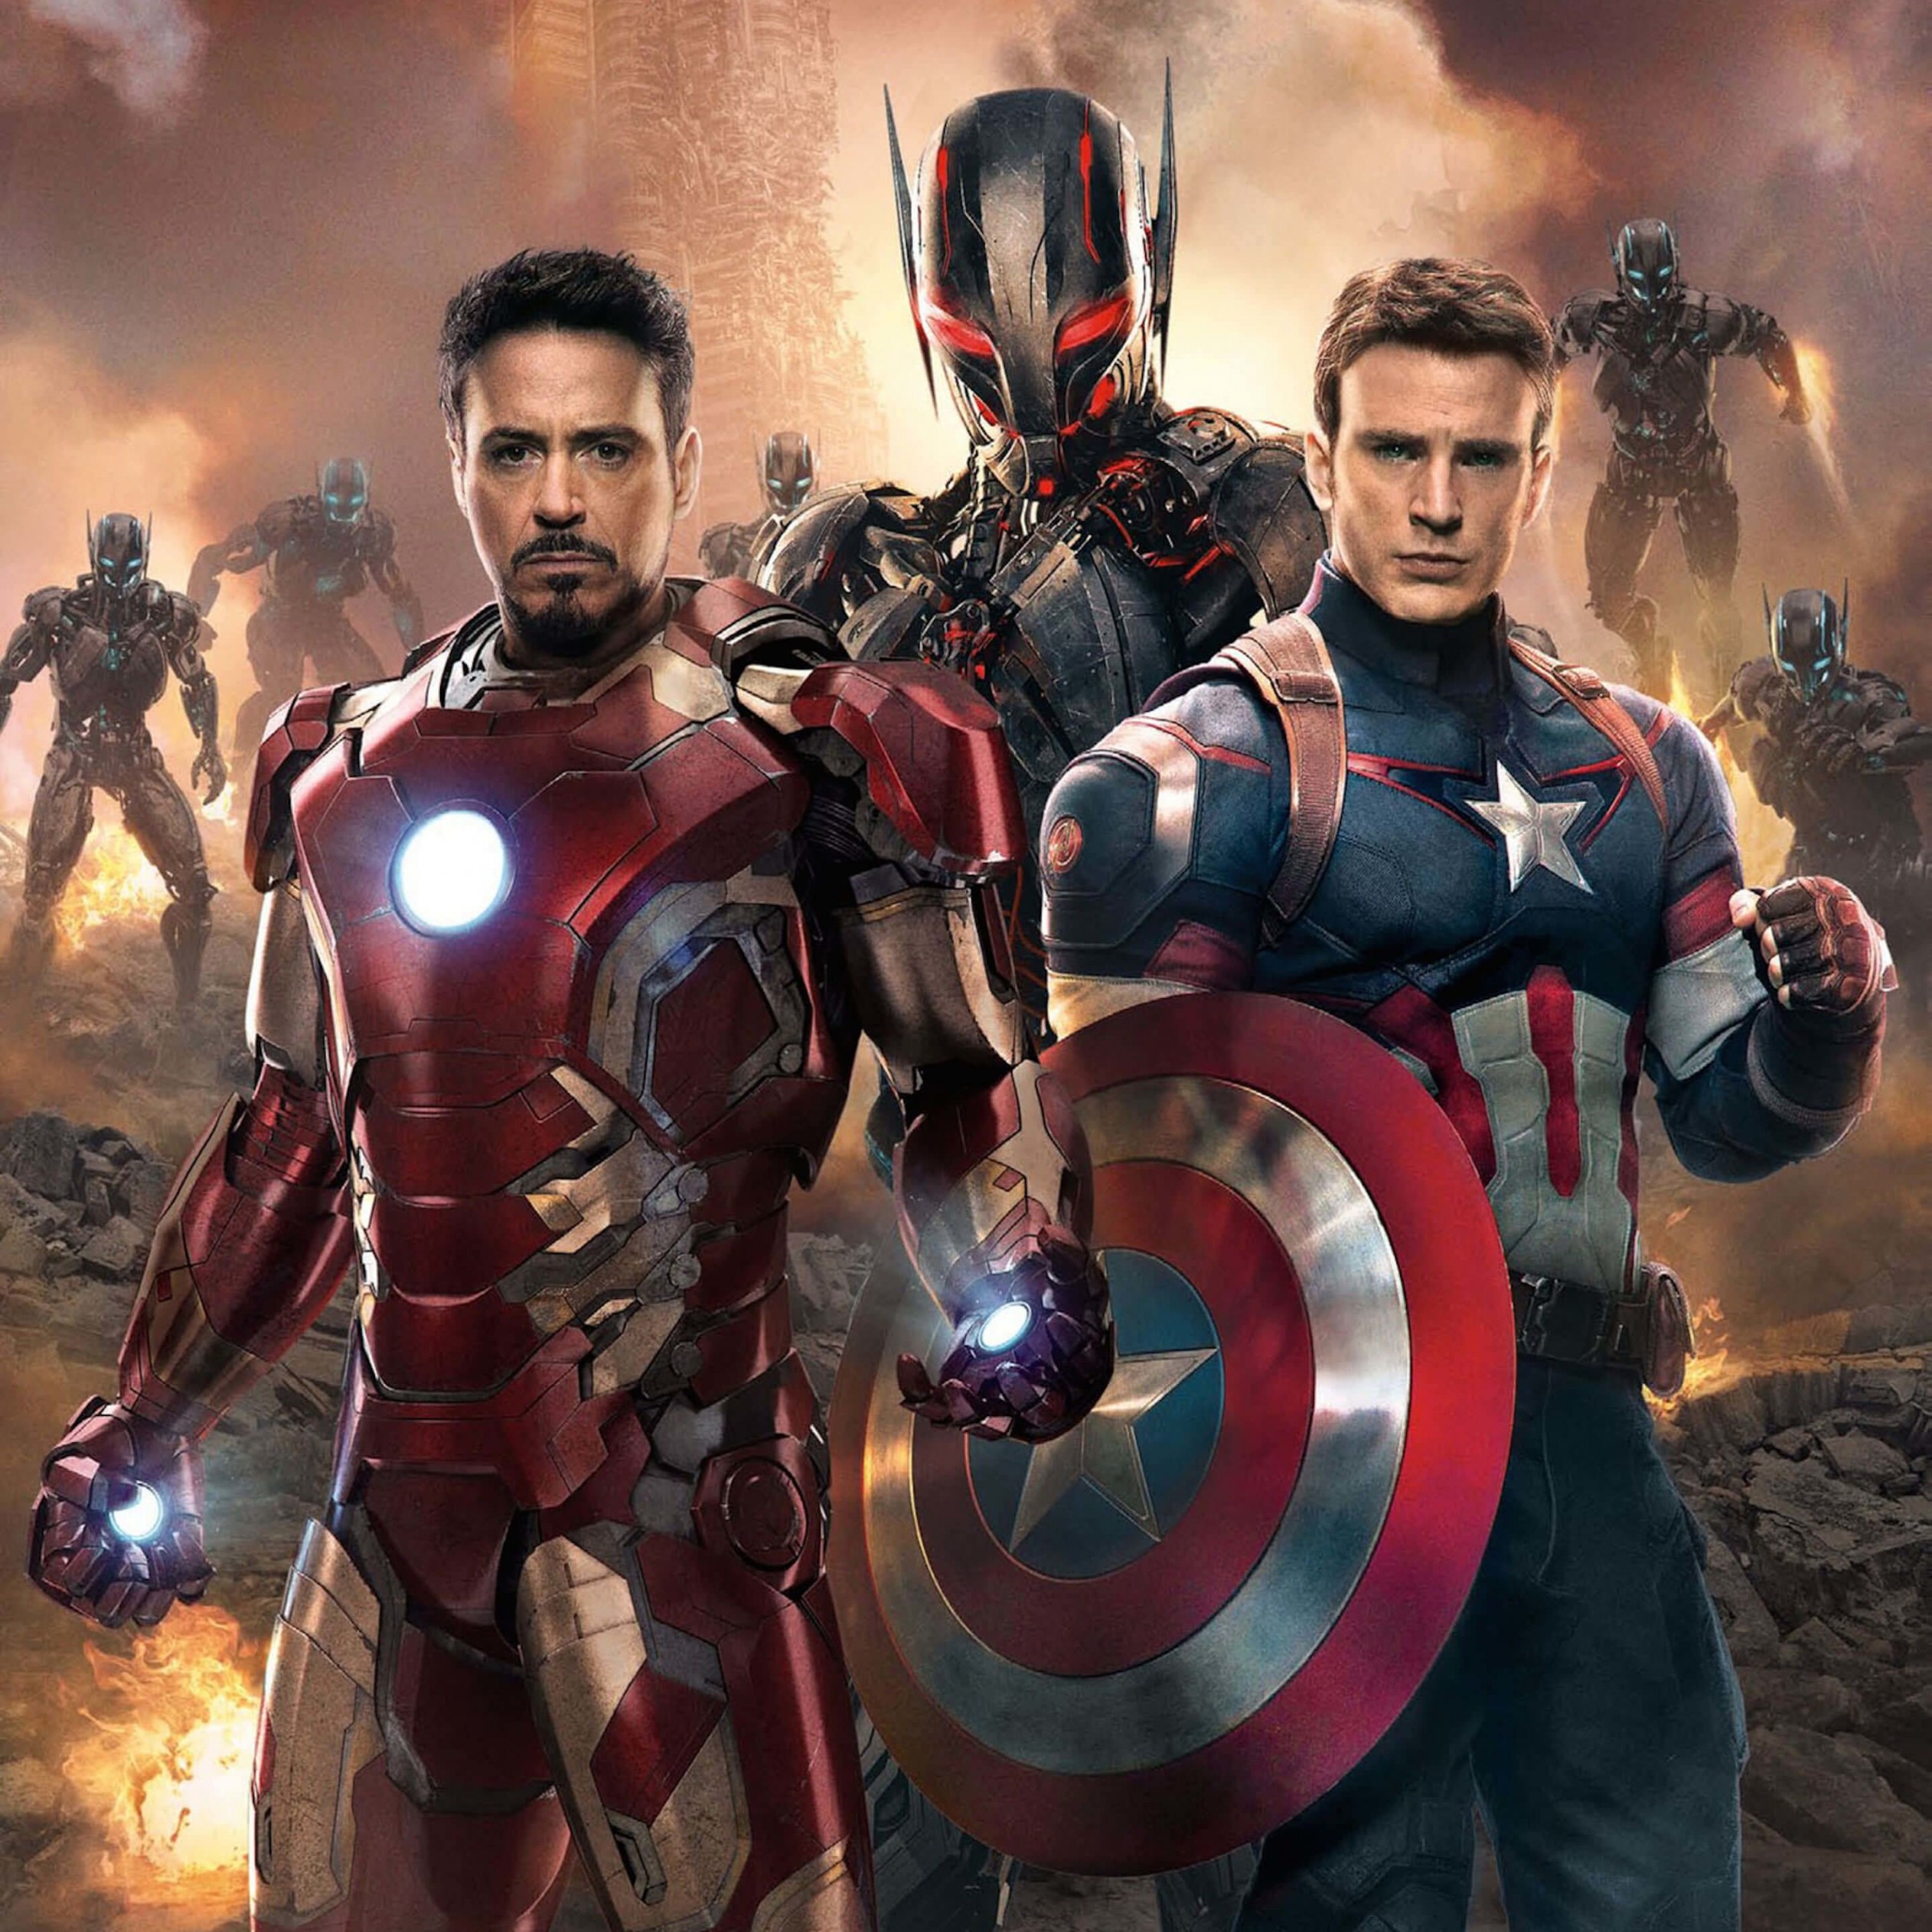 The Avengers: Age of Ultron - Iron Man and Captain America Wallpaper for Apple iPad 3